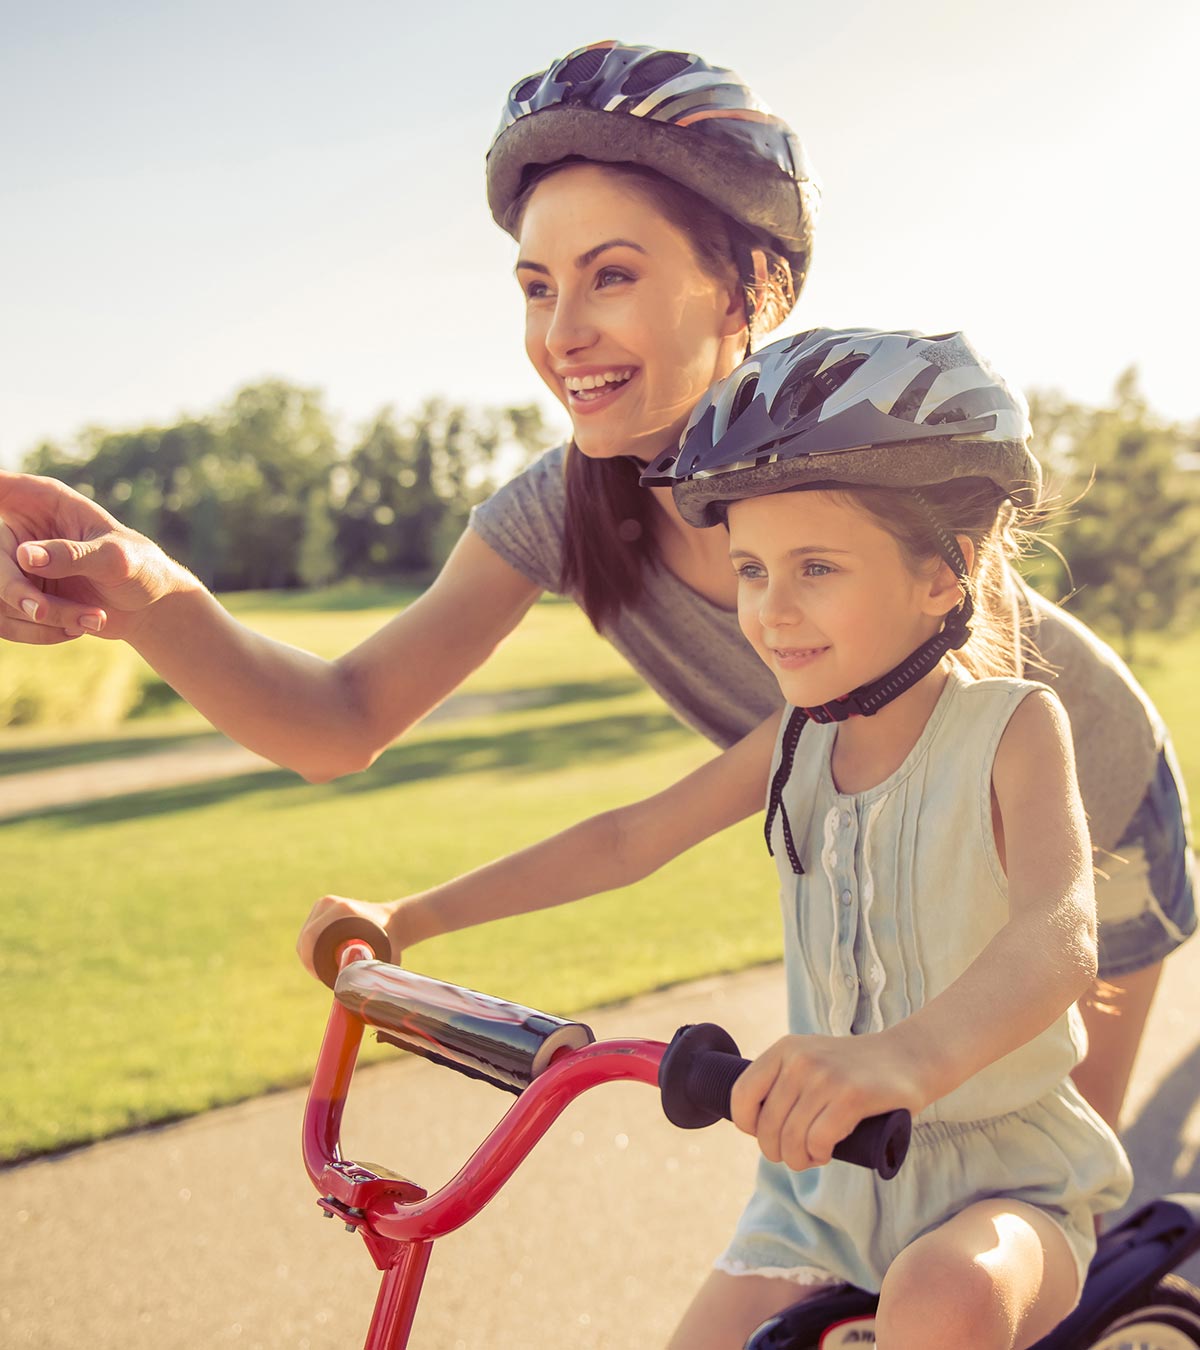 A girl riding a bicycle with her mother